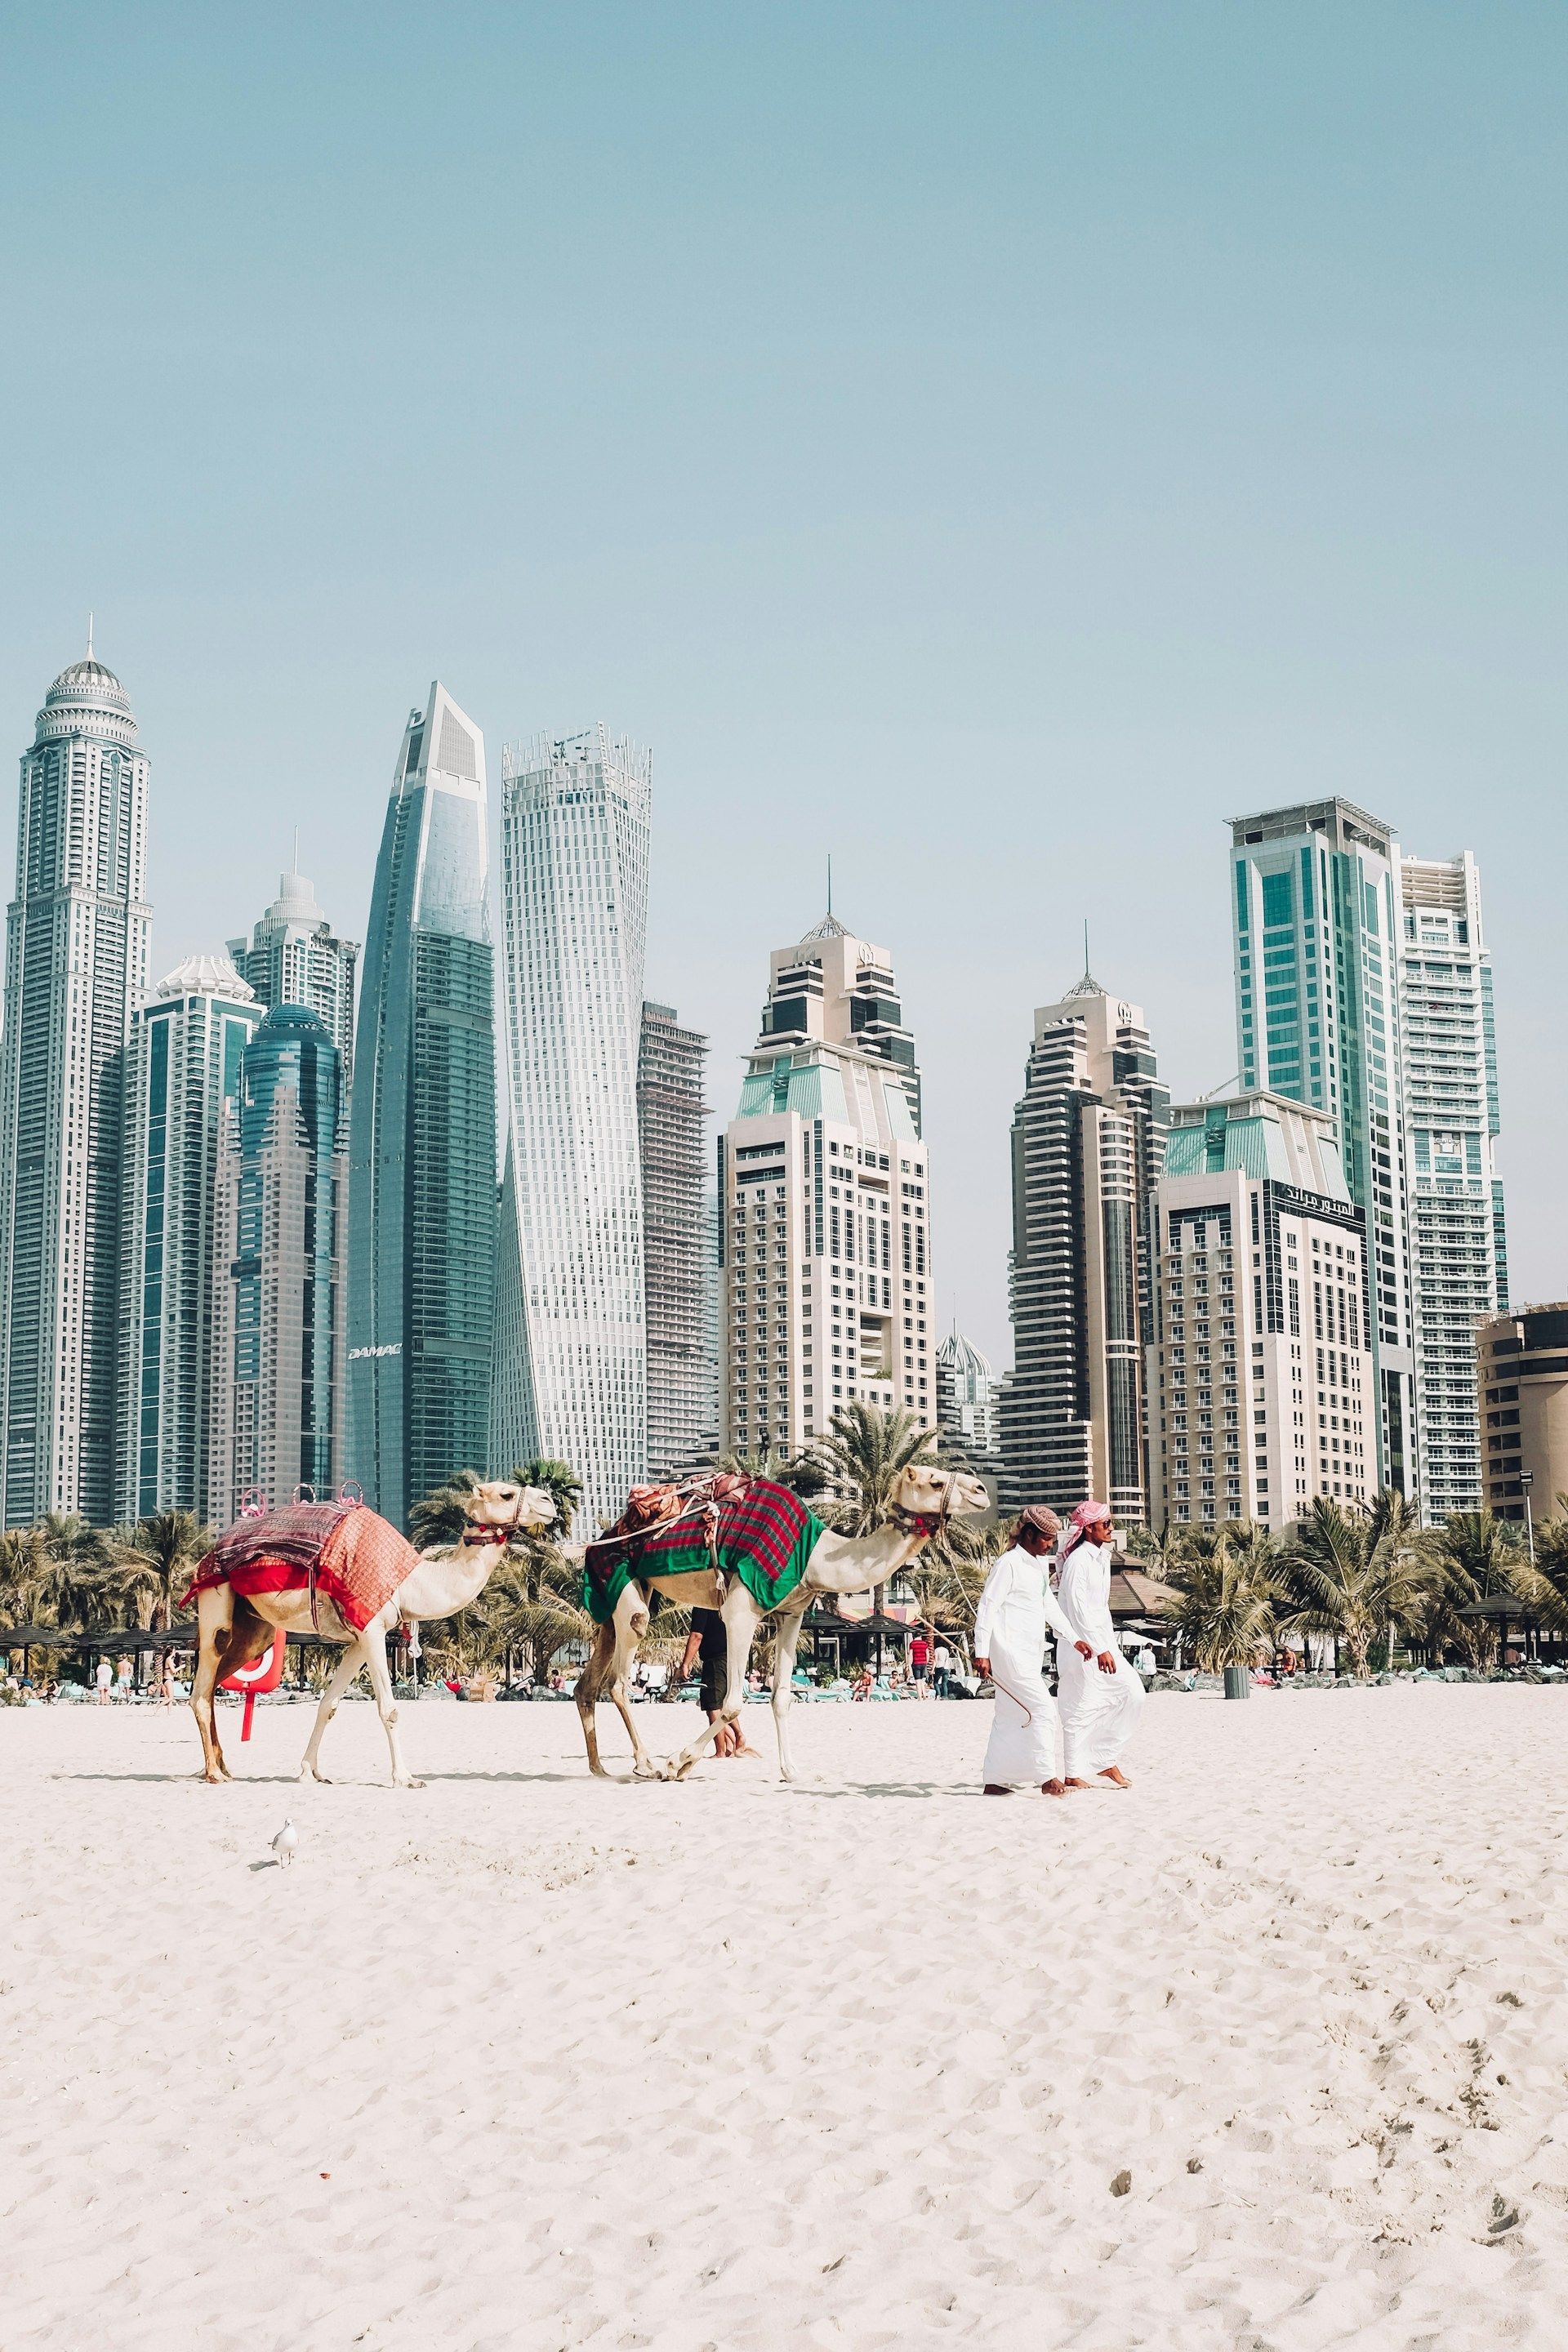 A group of people riding camels on a beach in front of a city skyline.